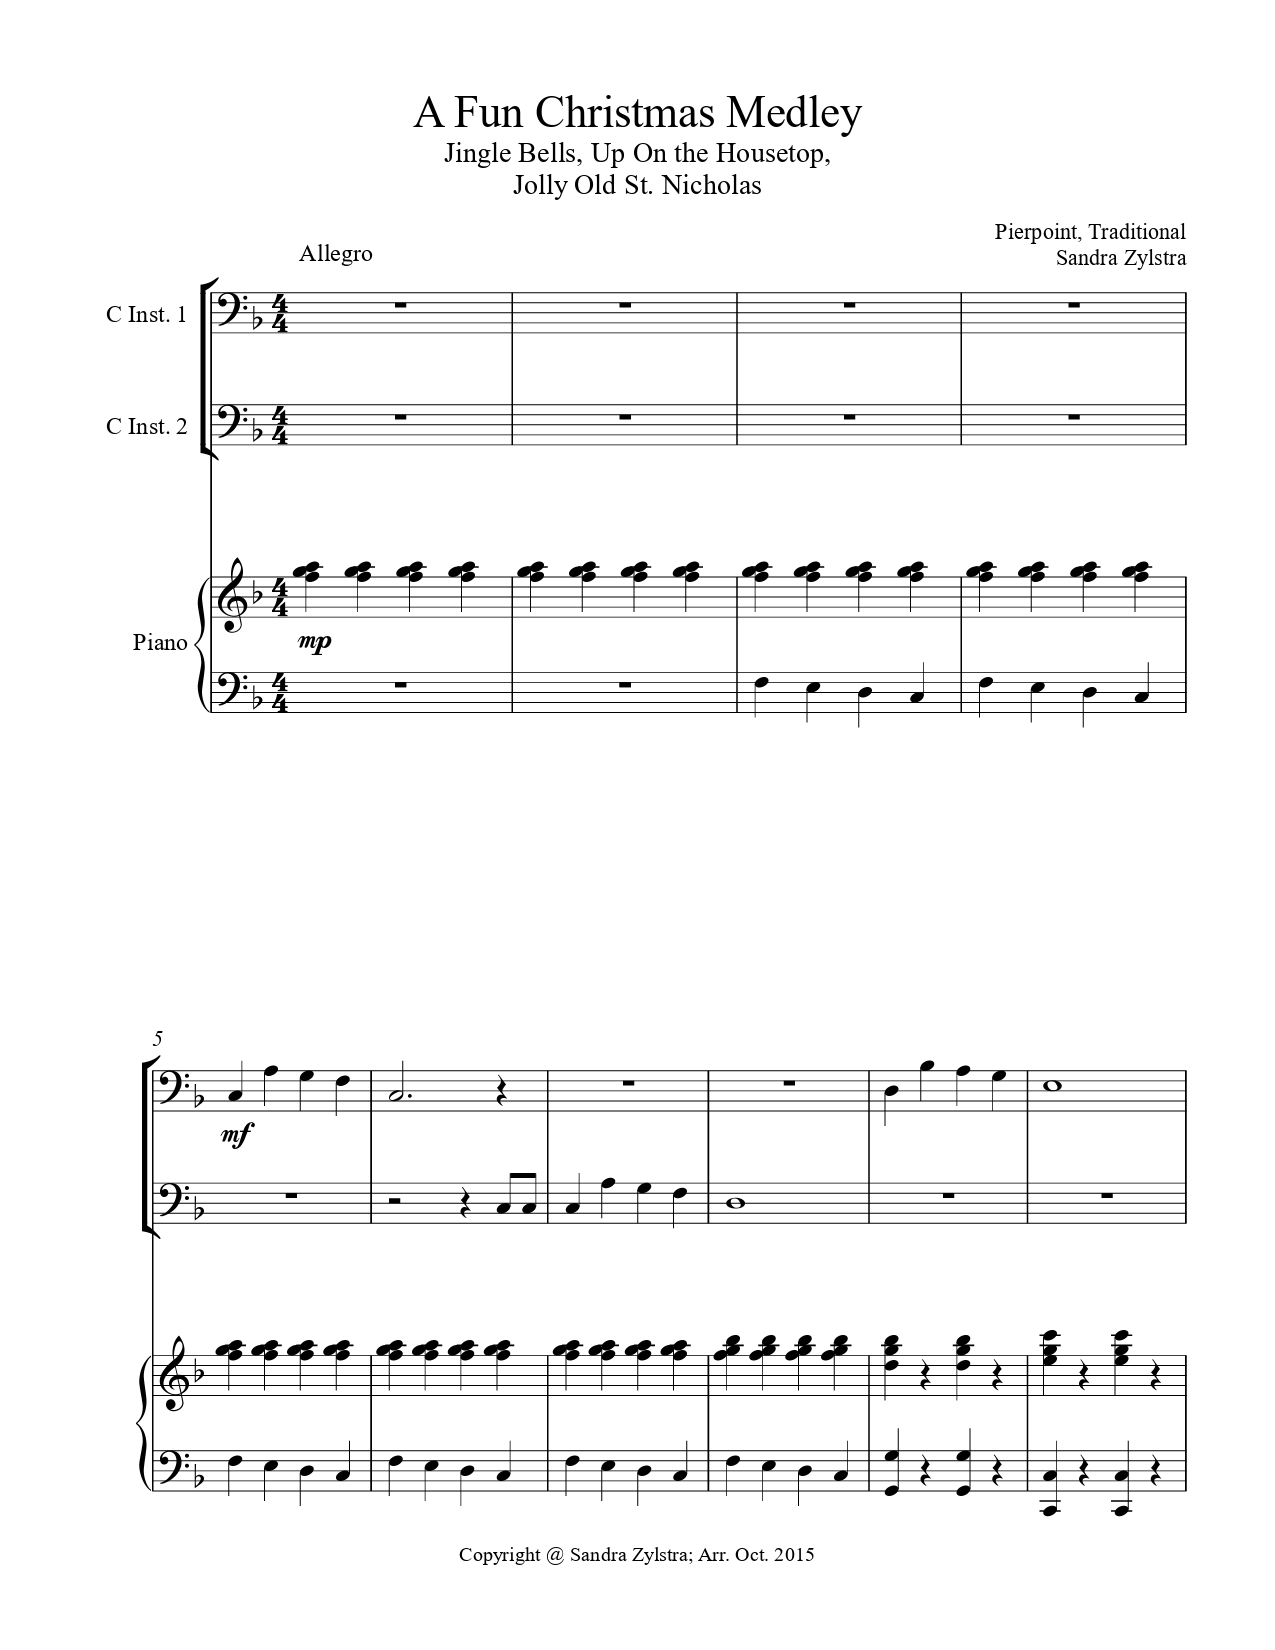 A Fun Christmas Medley bass C instrument duet parts cover page 00021 1